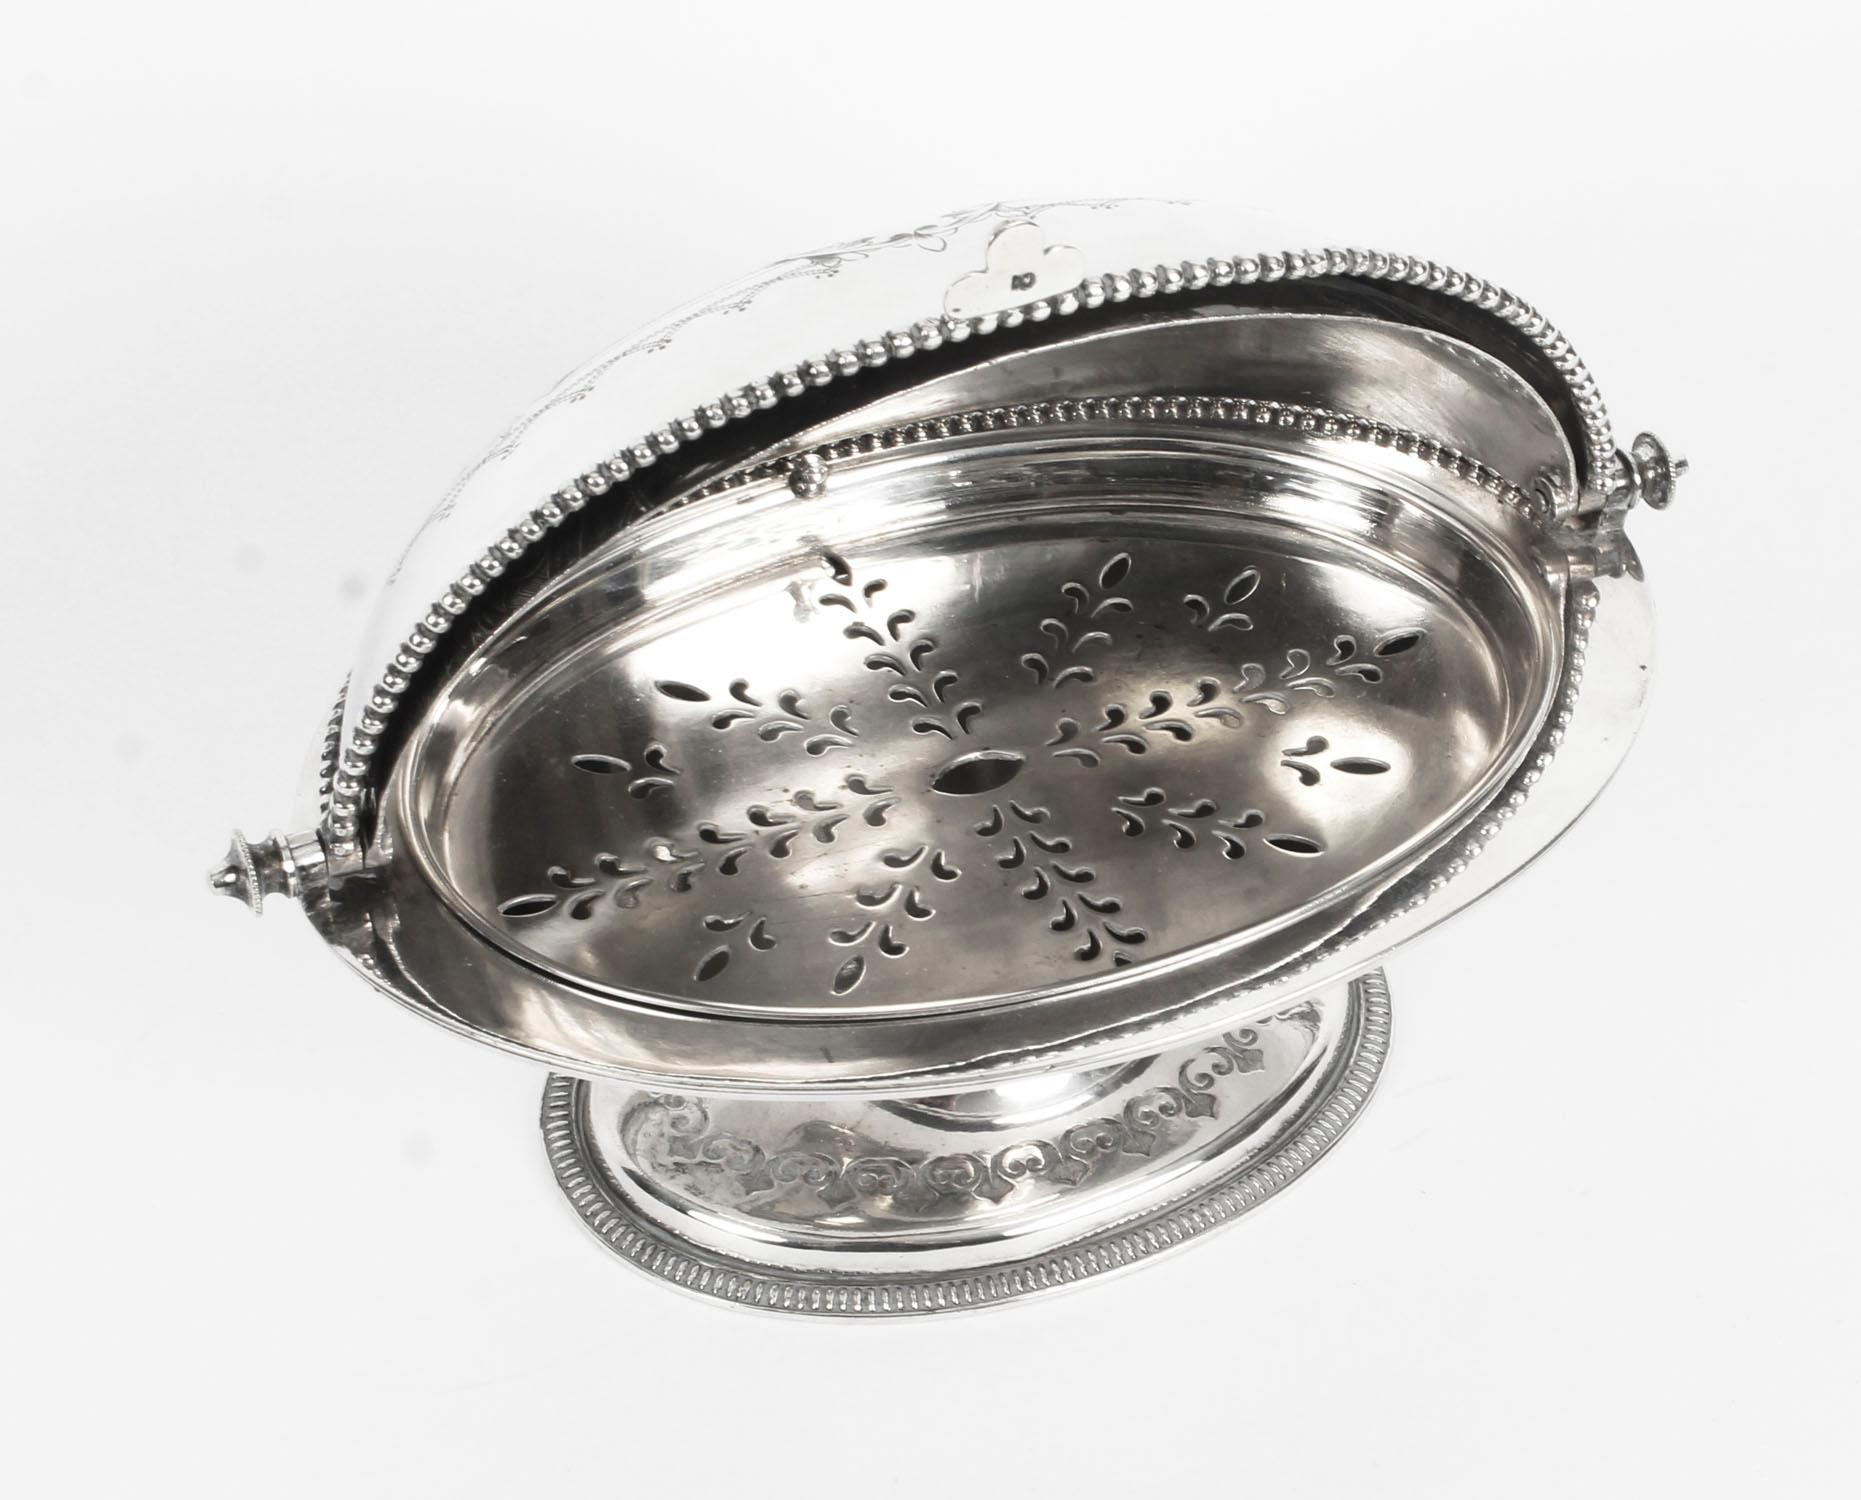 Antique English Silver Plated Roll Over Butter Dish, 19th Century 5